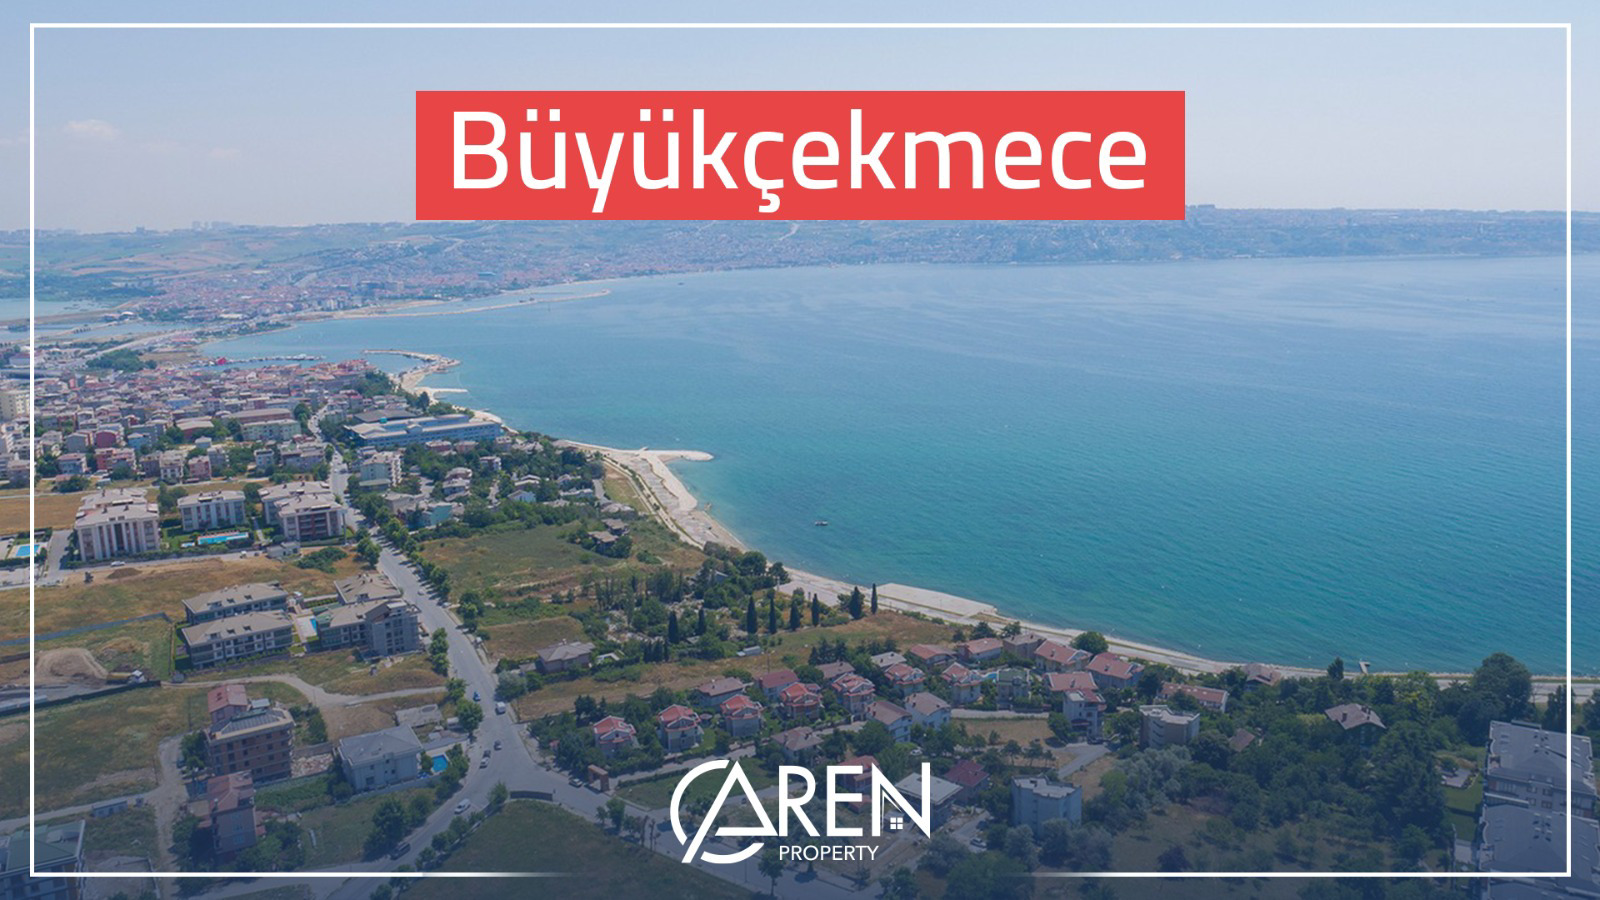 where-is-buyukcekmece-located